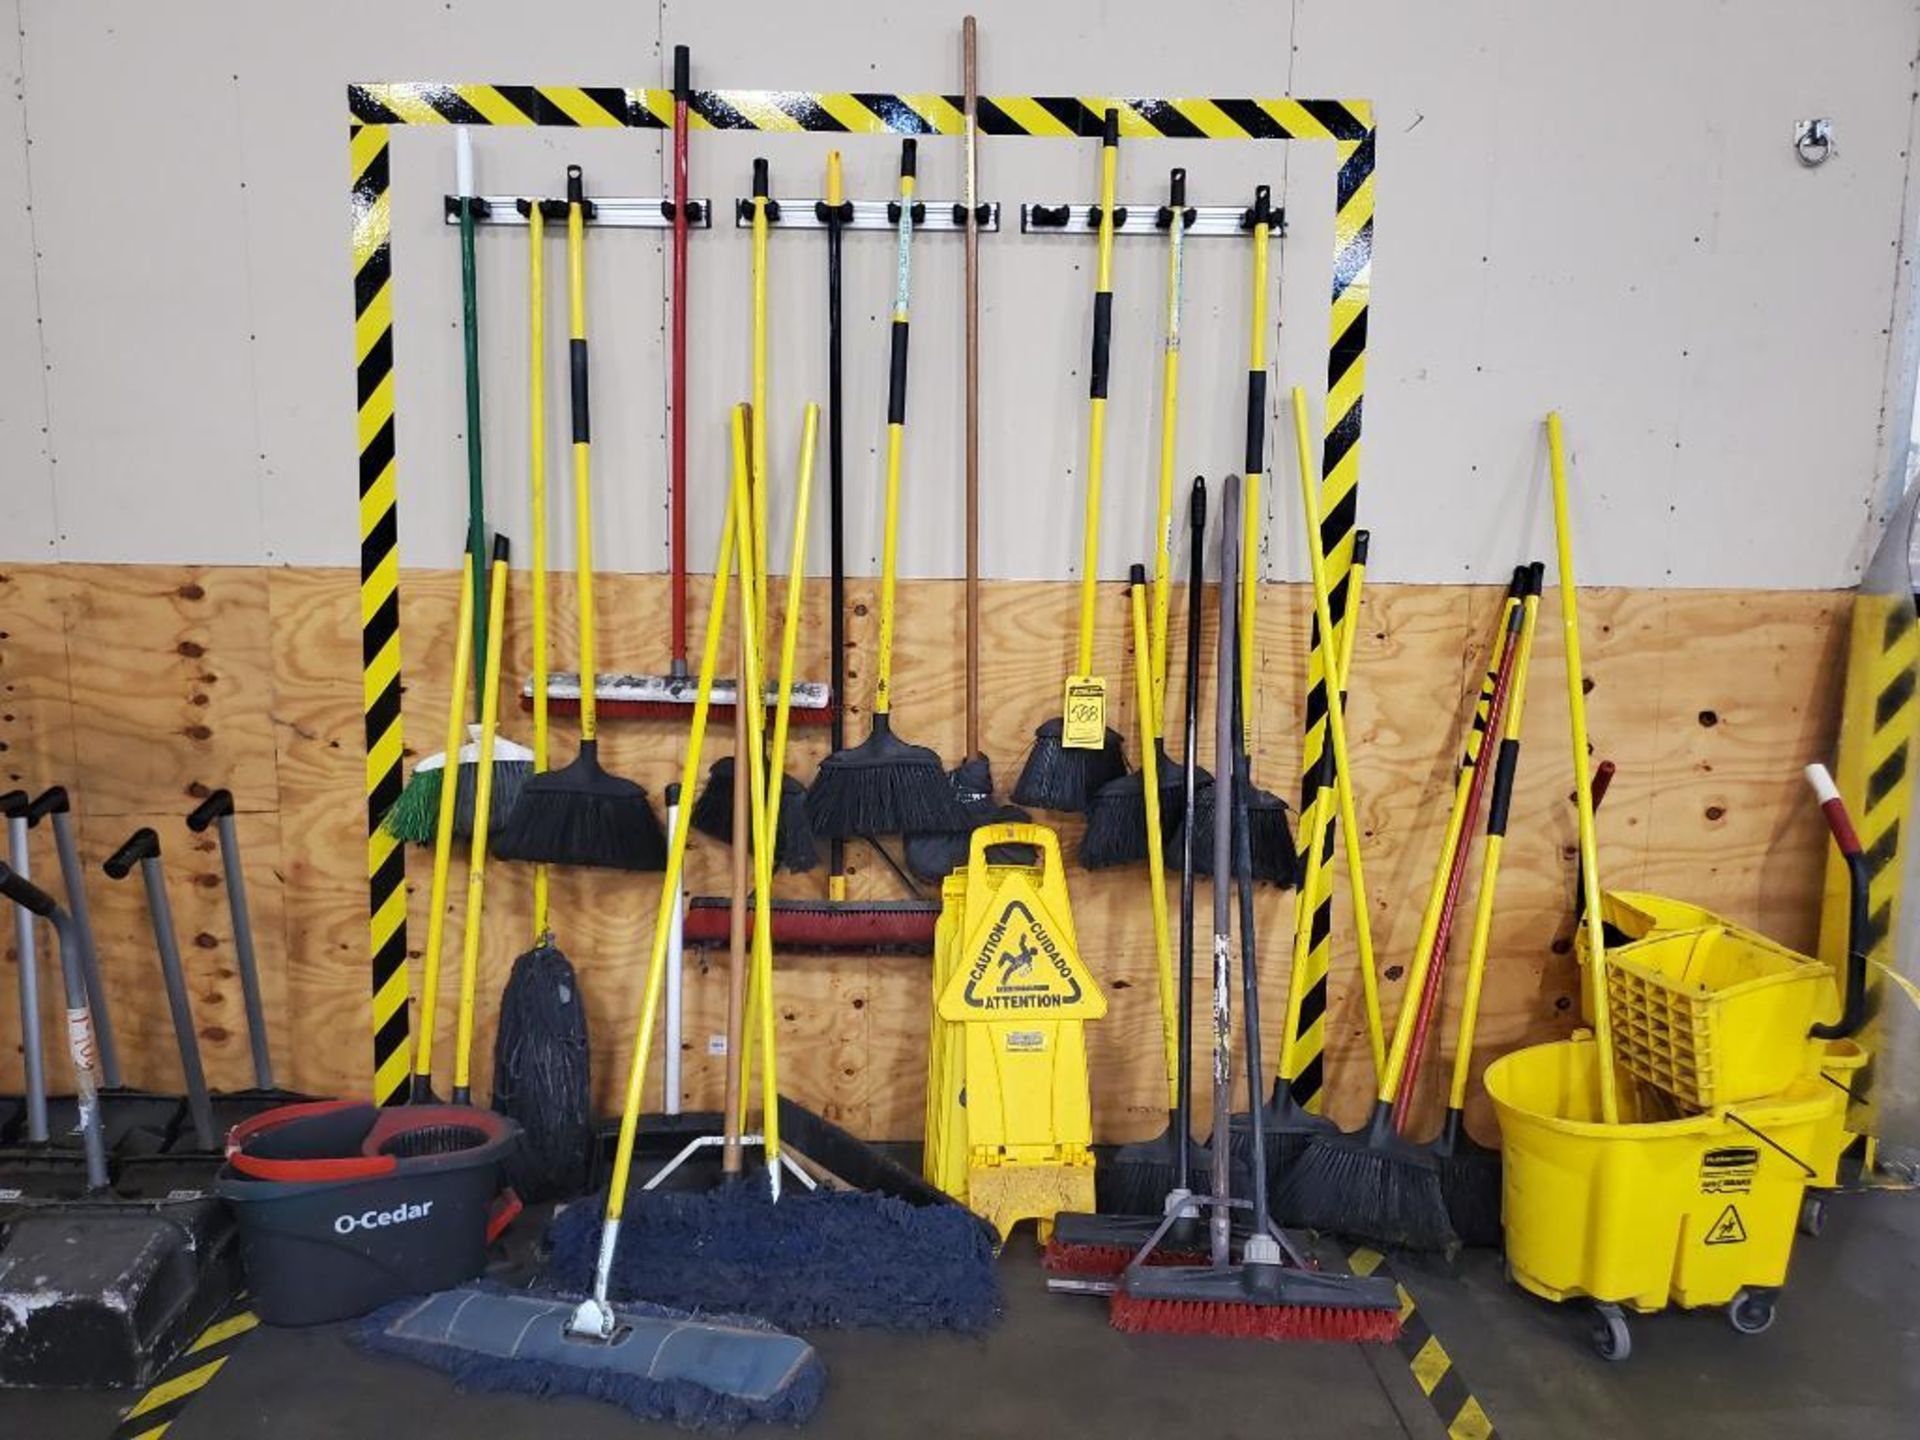 CLEANING TOOLS; BROOMS, MOPS, DUST PANS, STEPS, CLEANING CARTS, ETC. - Image 3 of 5